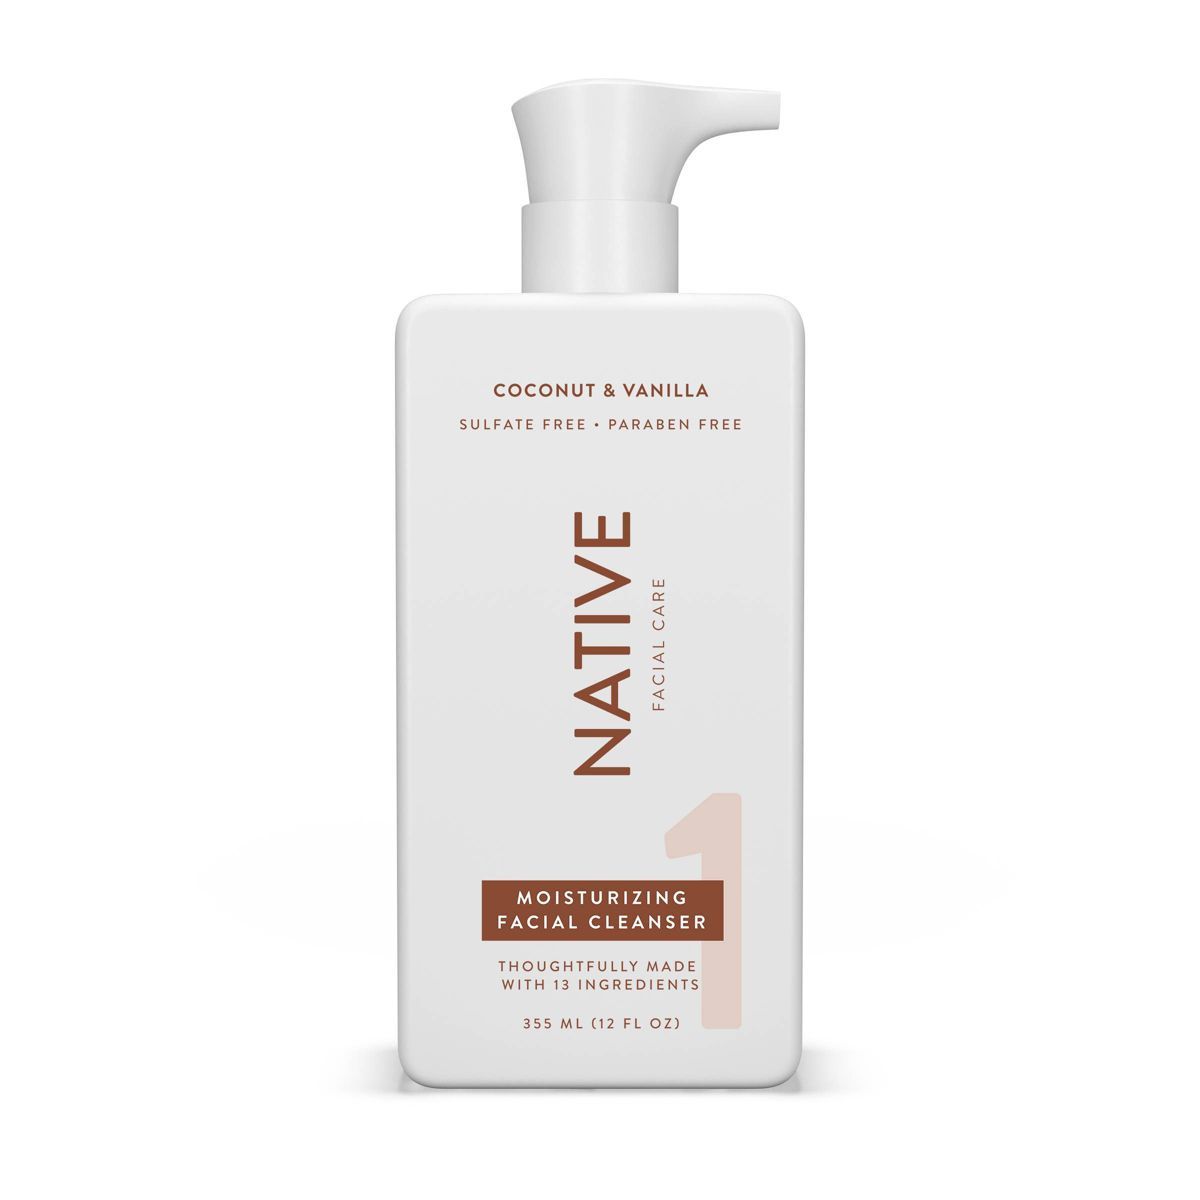 Native Face Wash Moisturizing Coconut and Vanilla Facial Cleanser with Niacinamide - 12 fl oz | Target